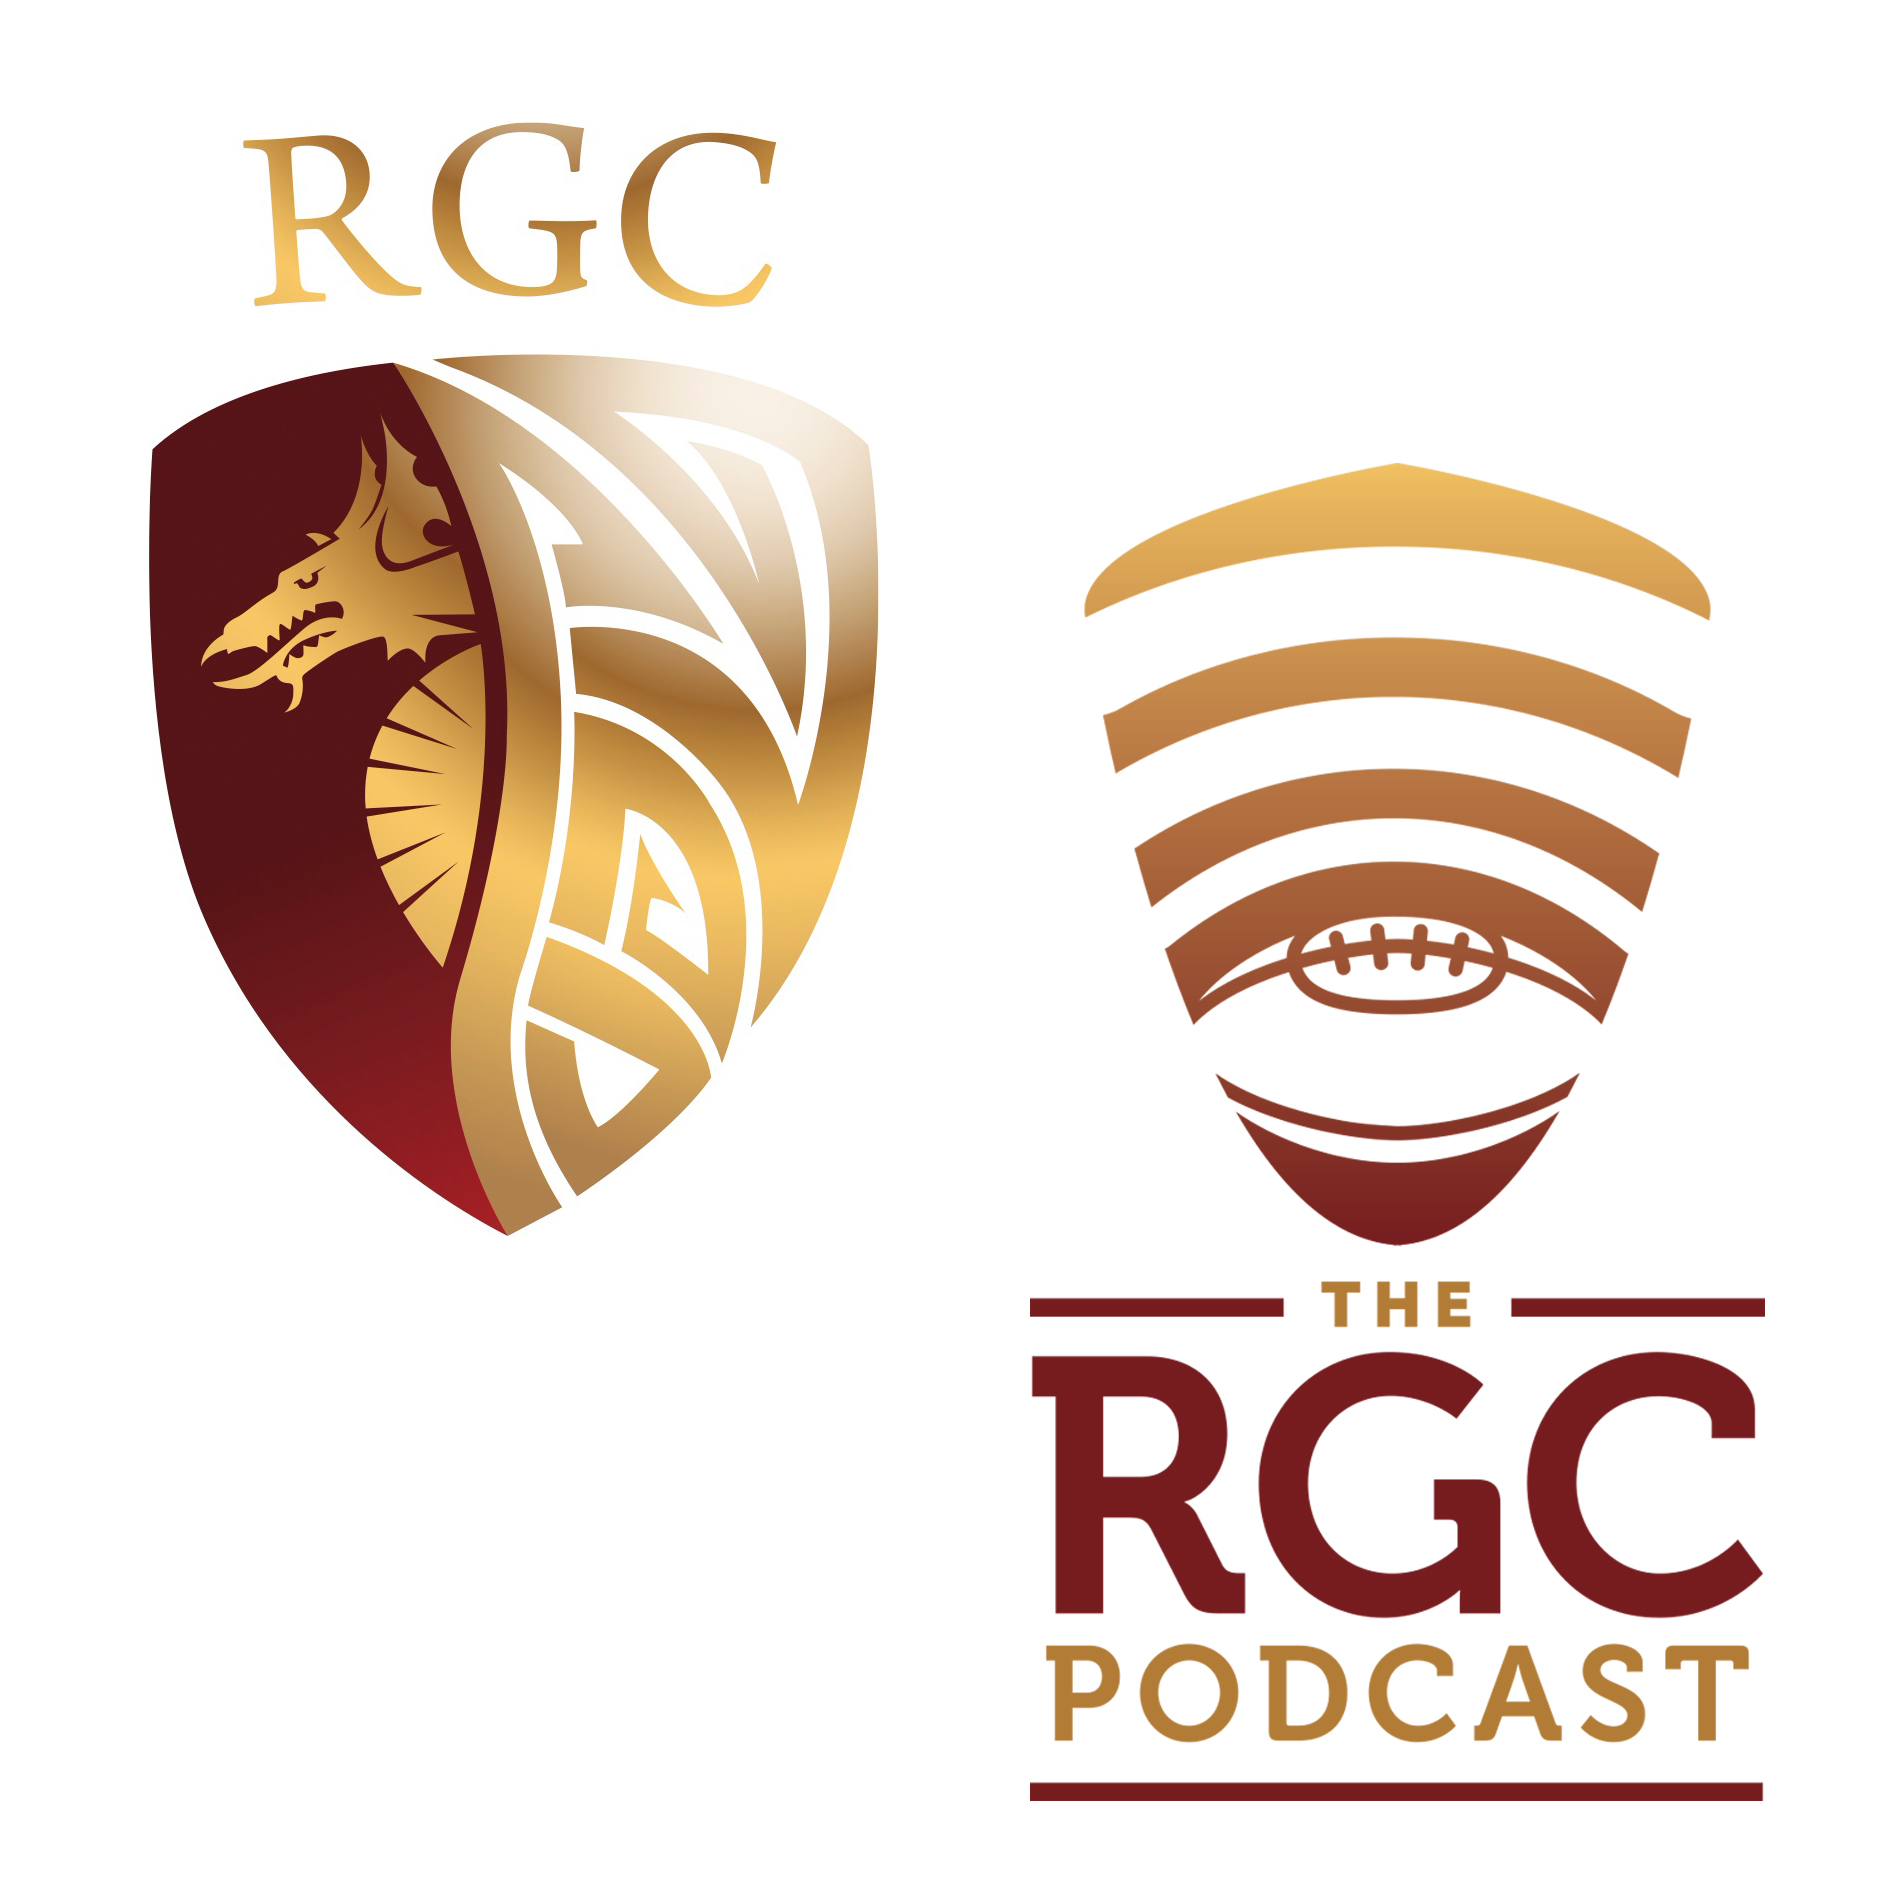 The RGC Rugby Podcast - Episode #1